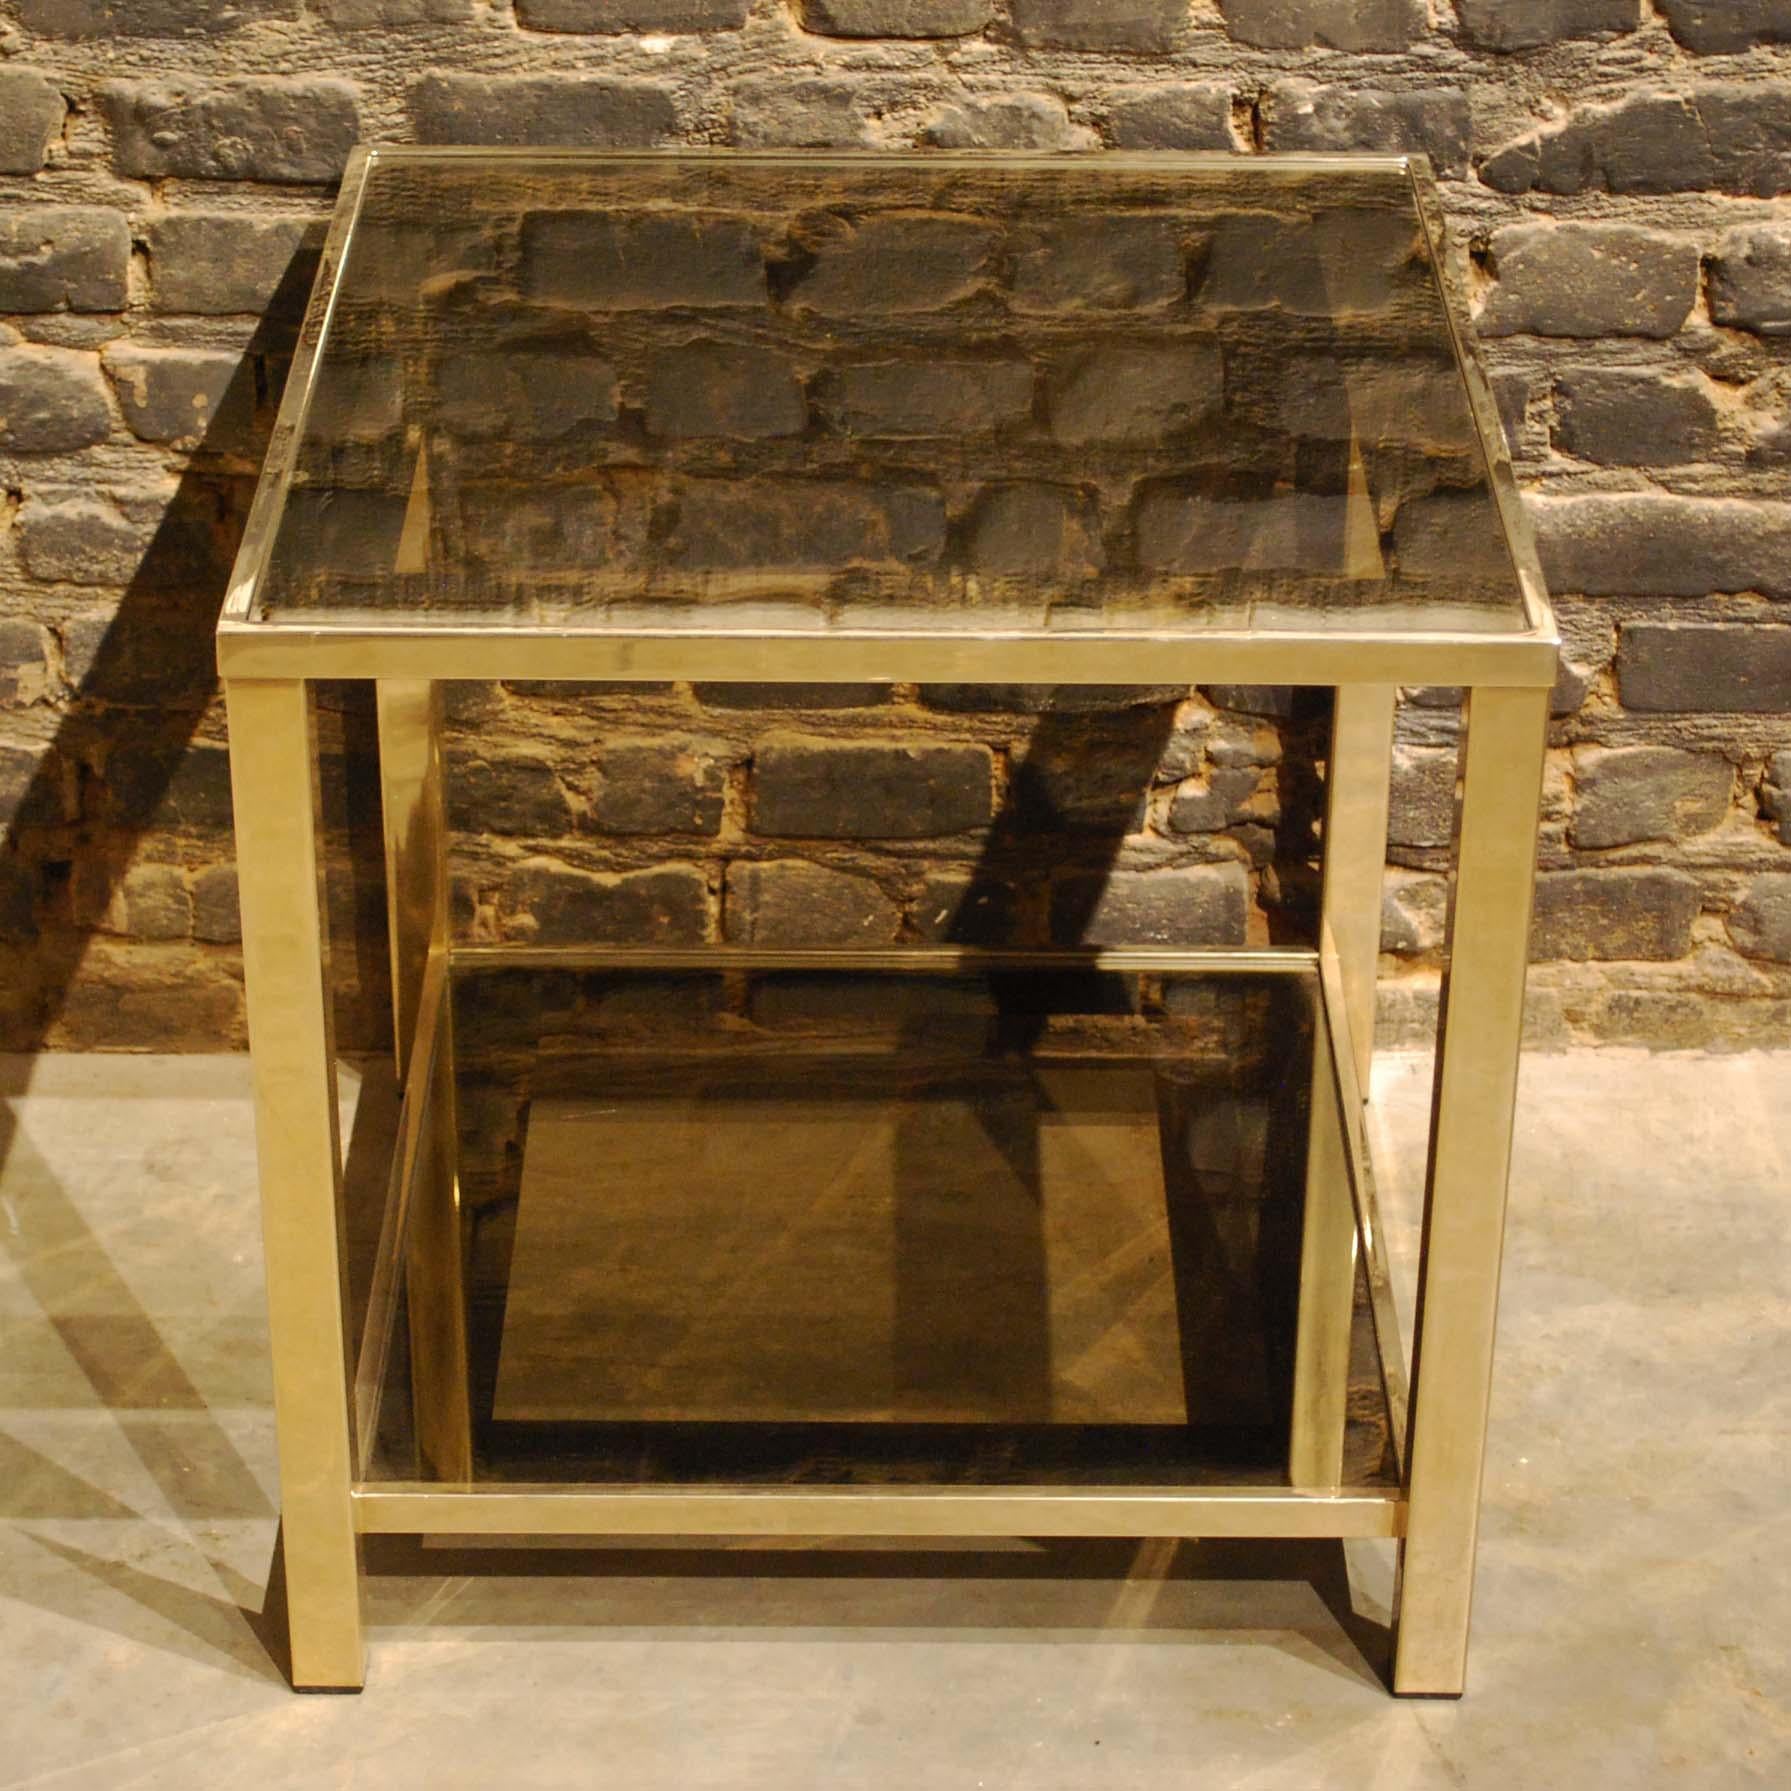 This beautiful side table was made in the early 1980s by Belgian Belgo Chrom. 
The table has a metal frame that was gold plated with a thin layer of 23-carat gold. The table features two smokey glass plates with a dark surround. The legs are